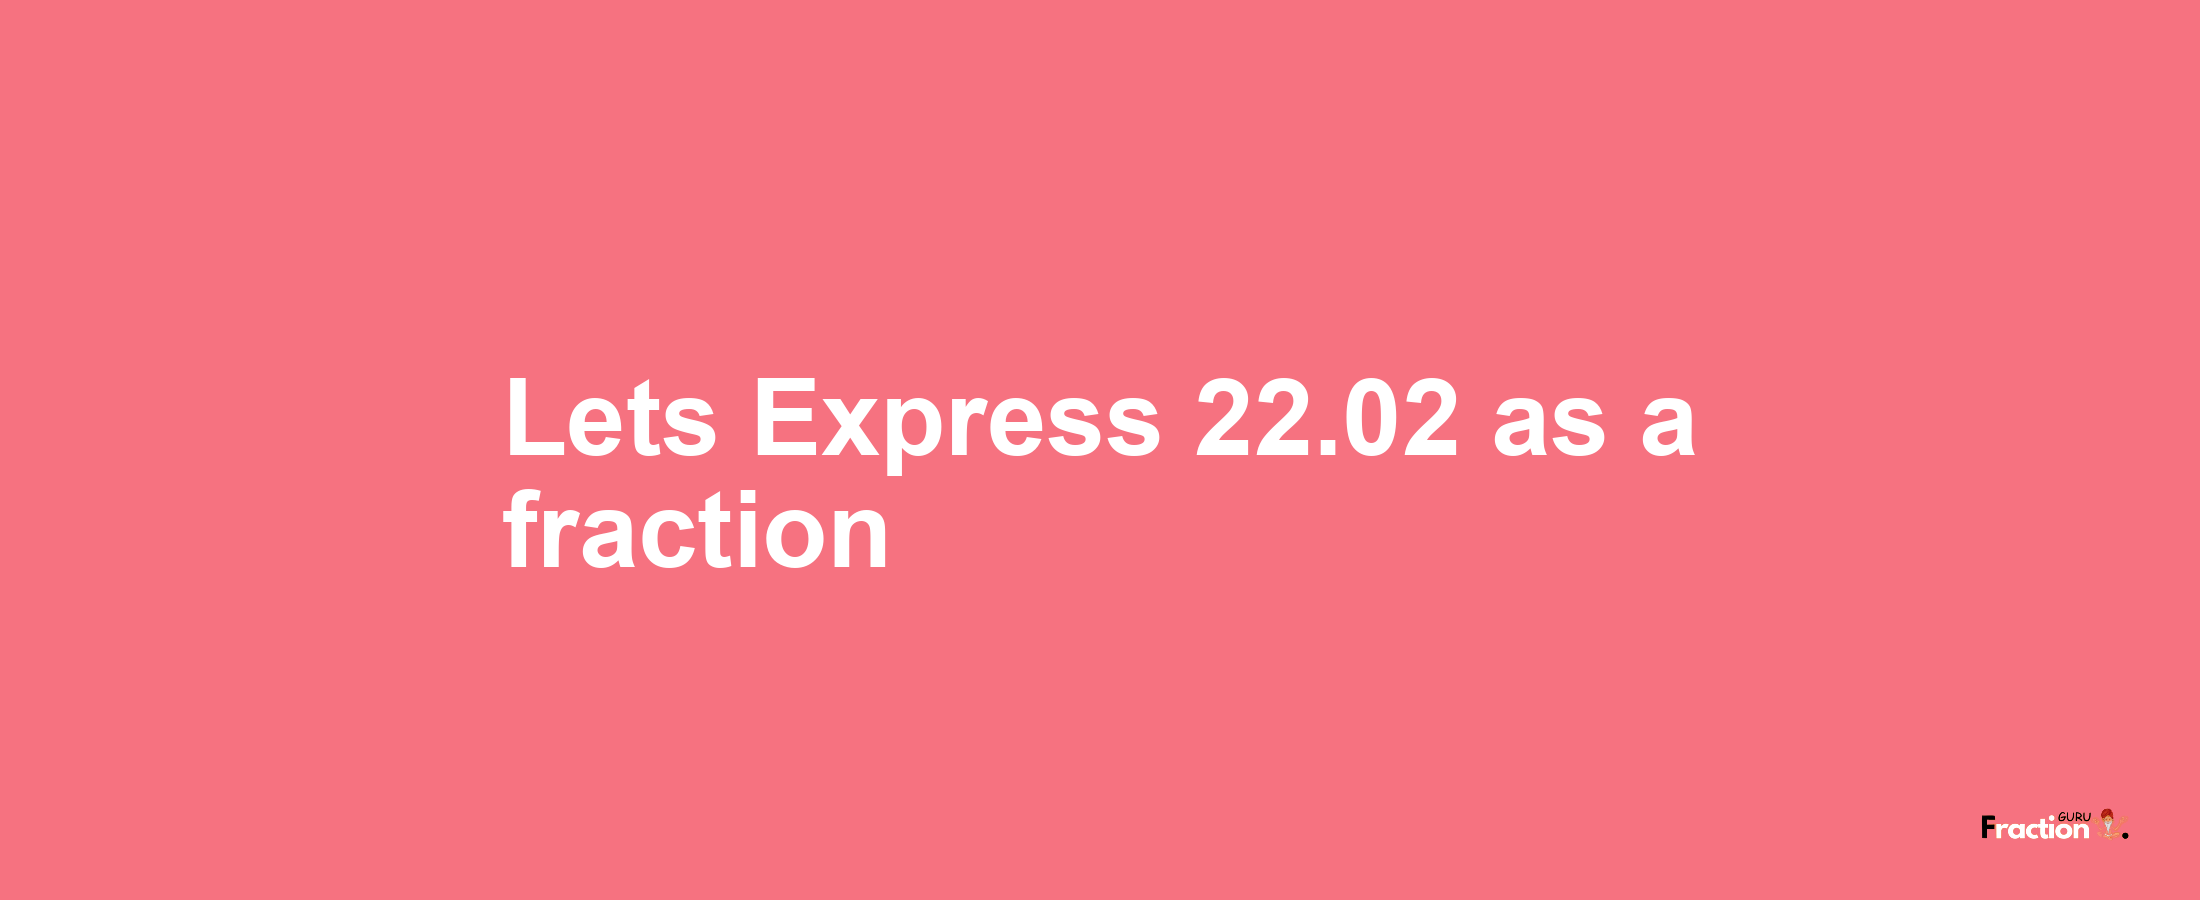 Lets Express 22.02 as afraction